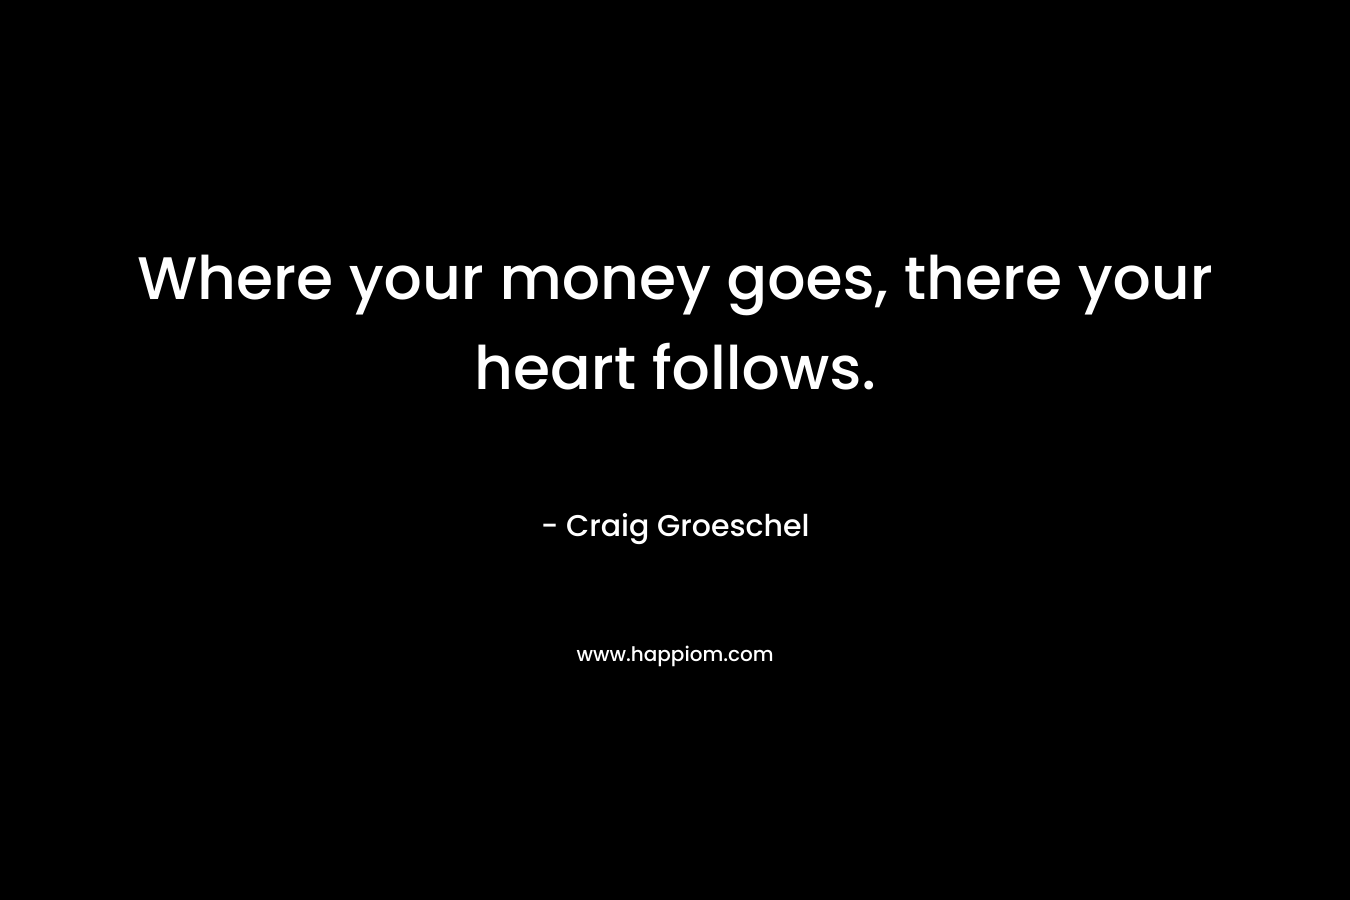 Where your money goes, there your heart follows.